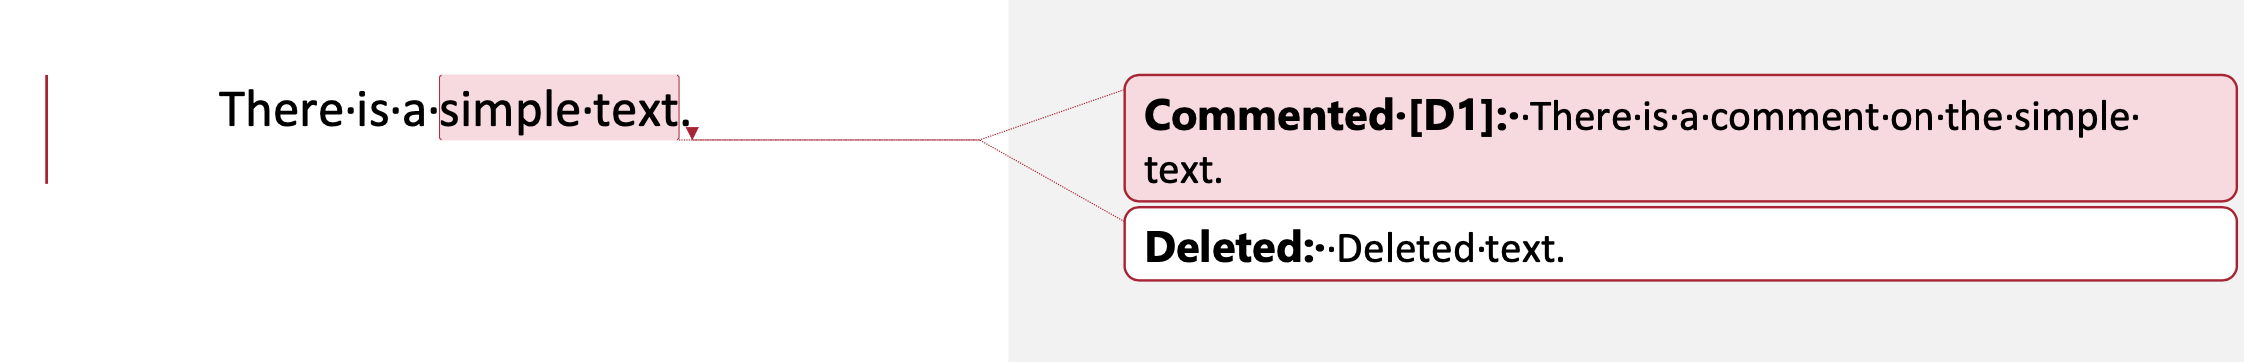 comments_and_revisions_example_aspose_words_cpp